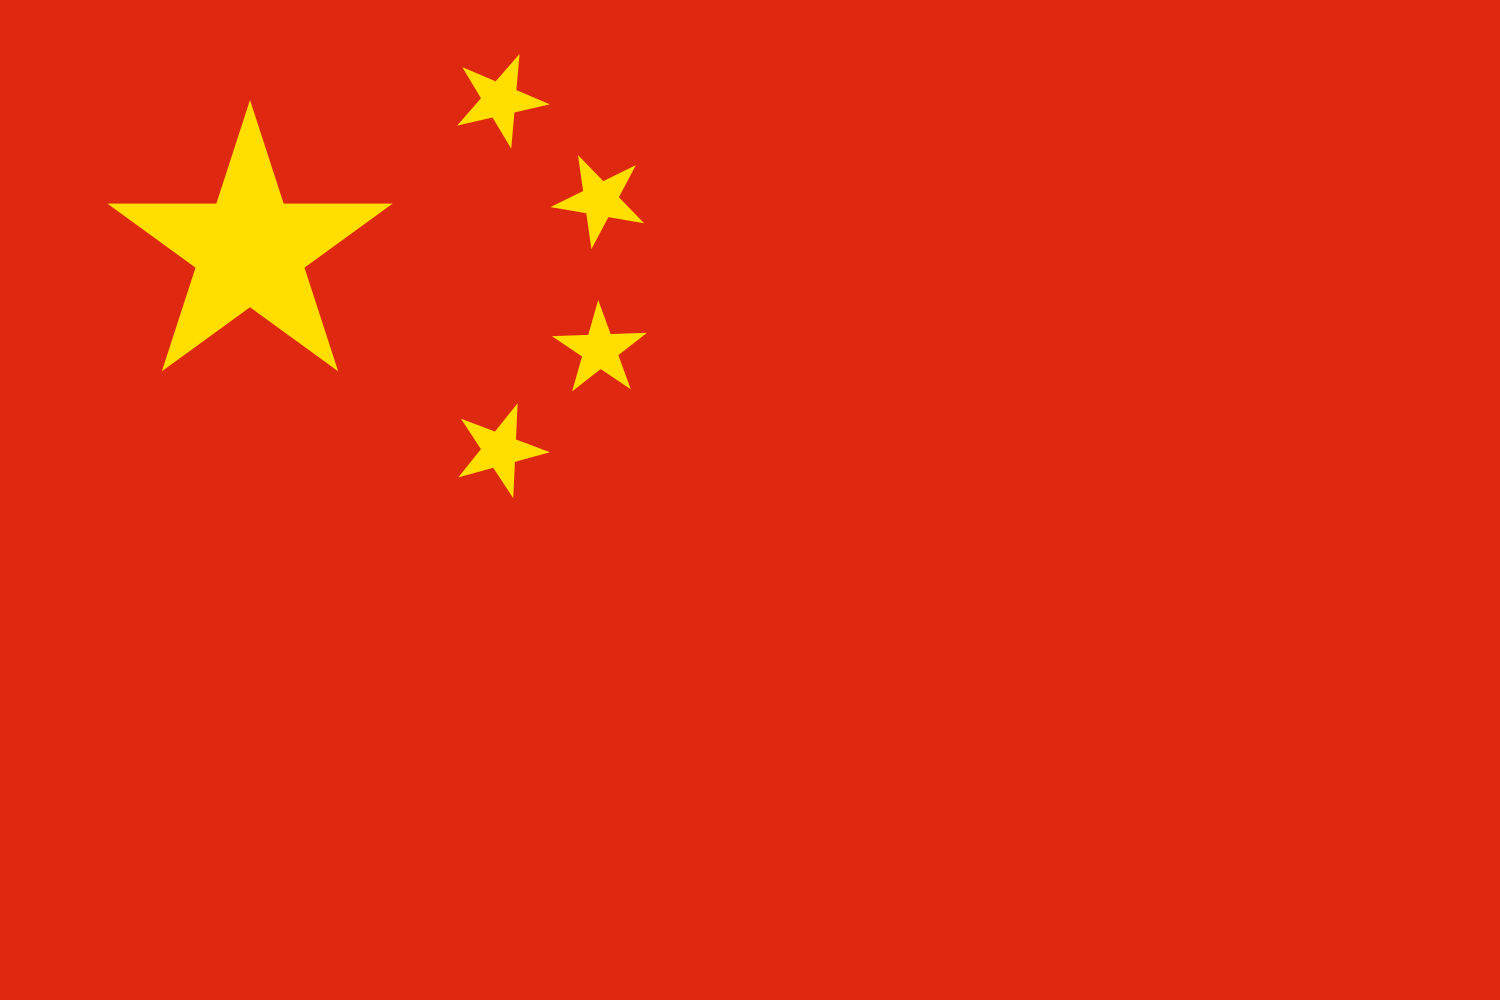 ople-27s-republic-of-china.png